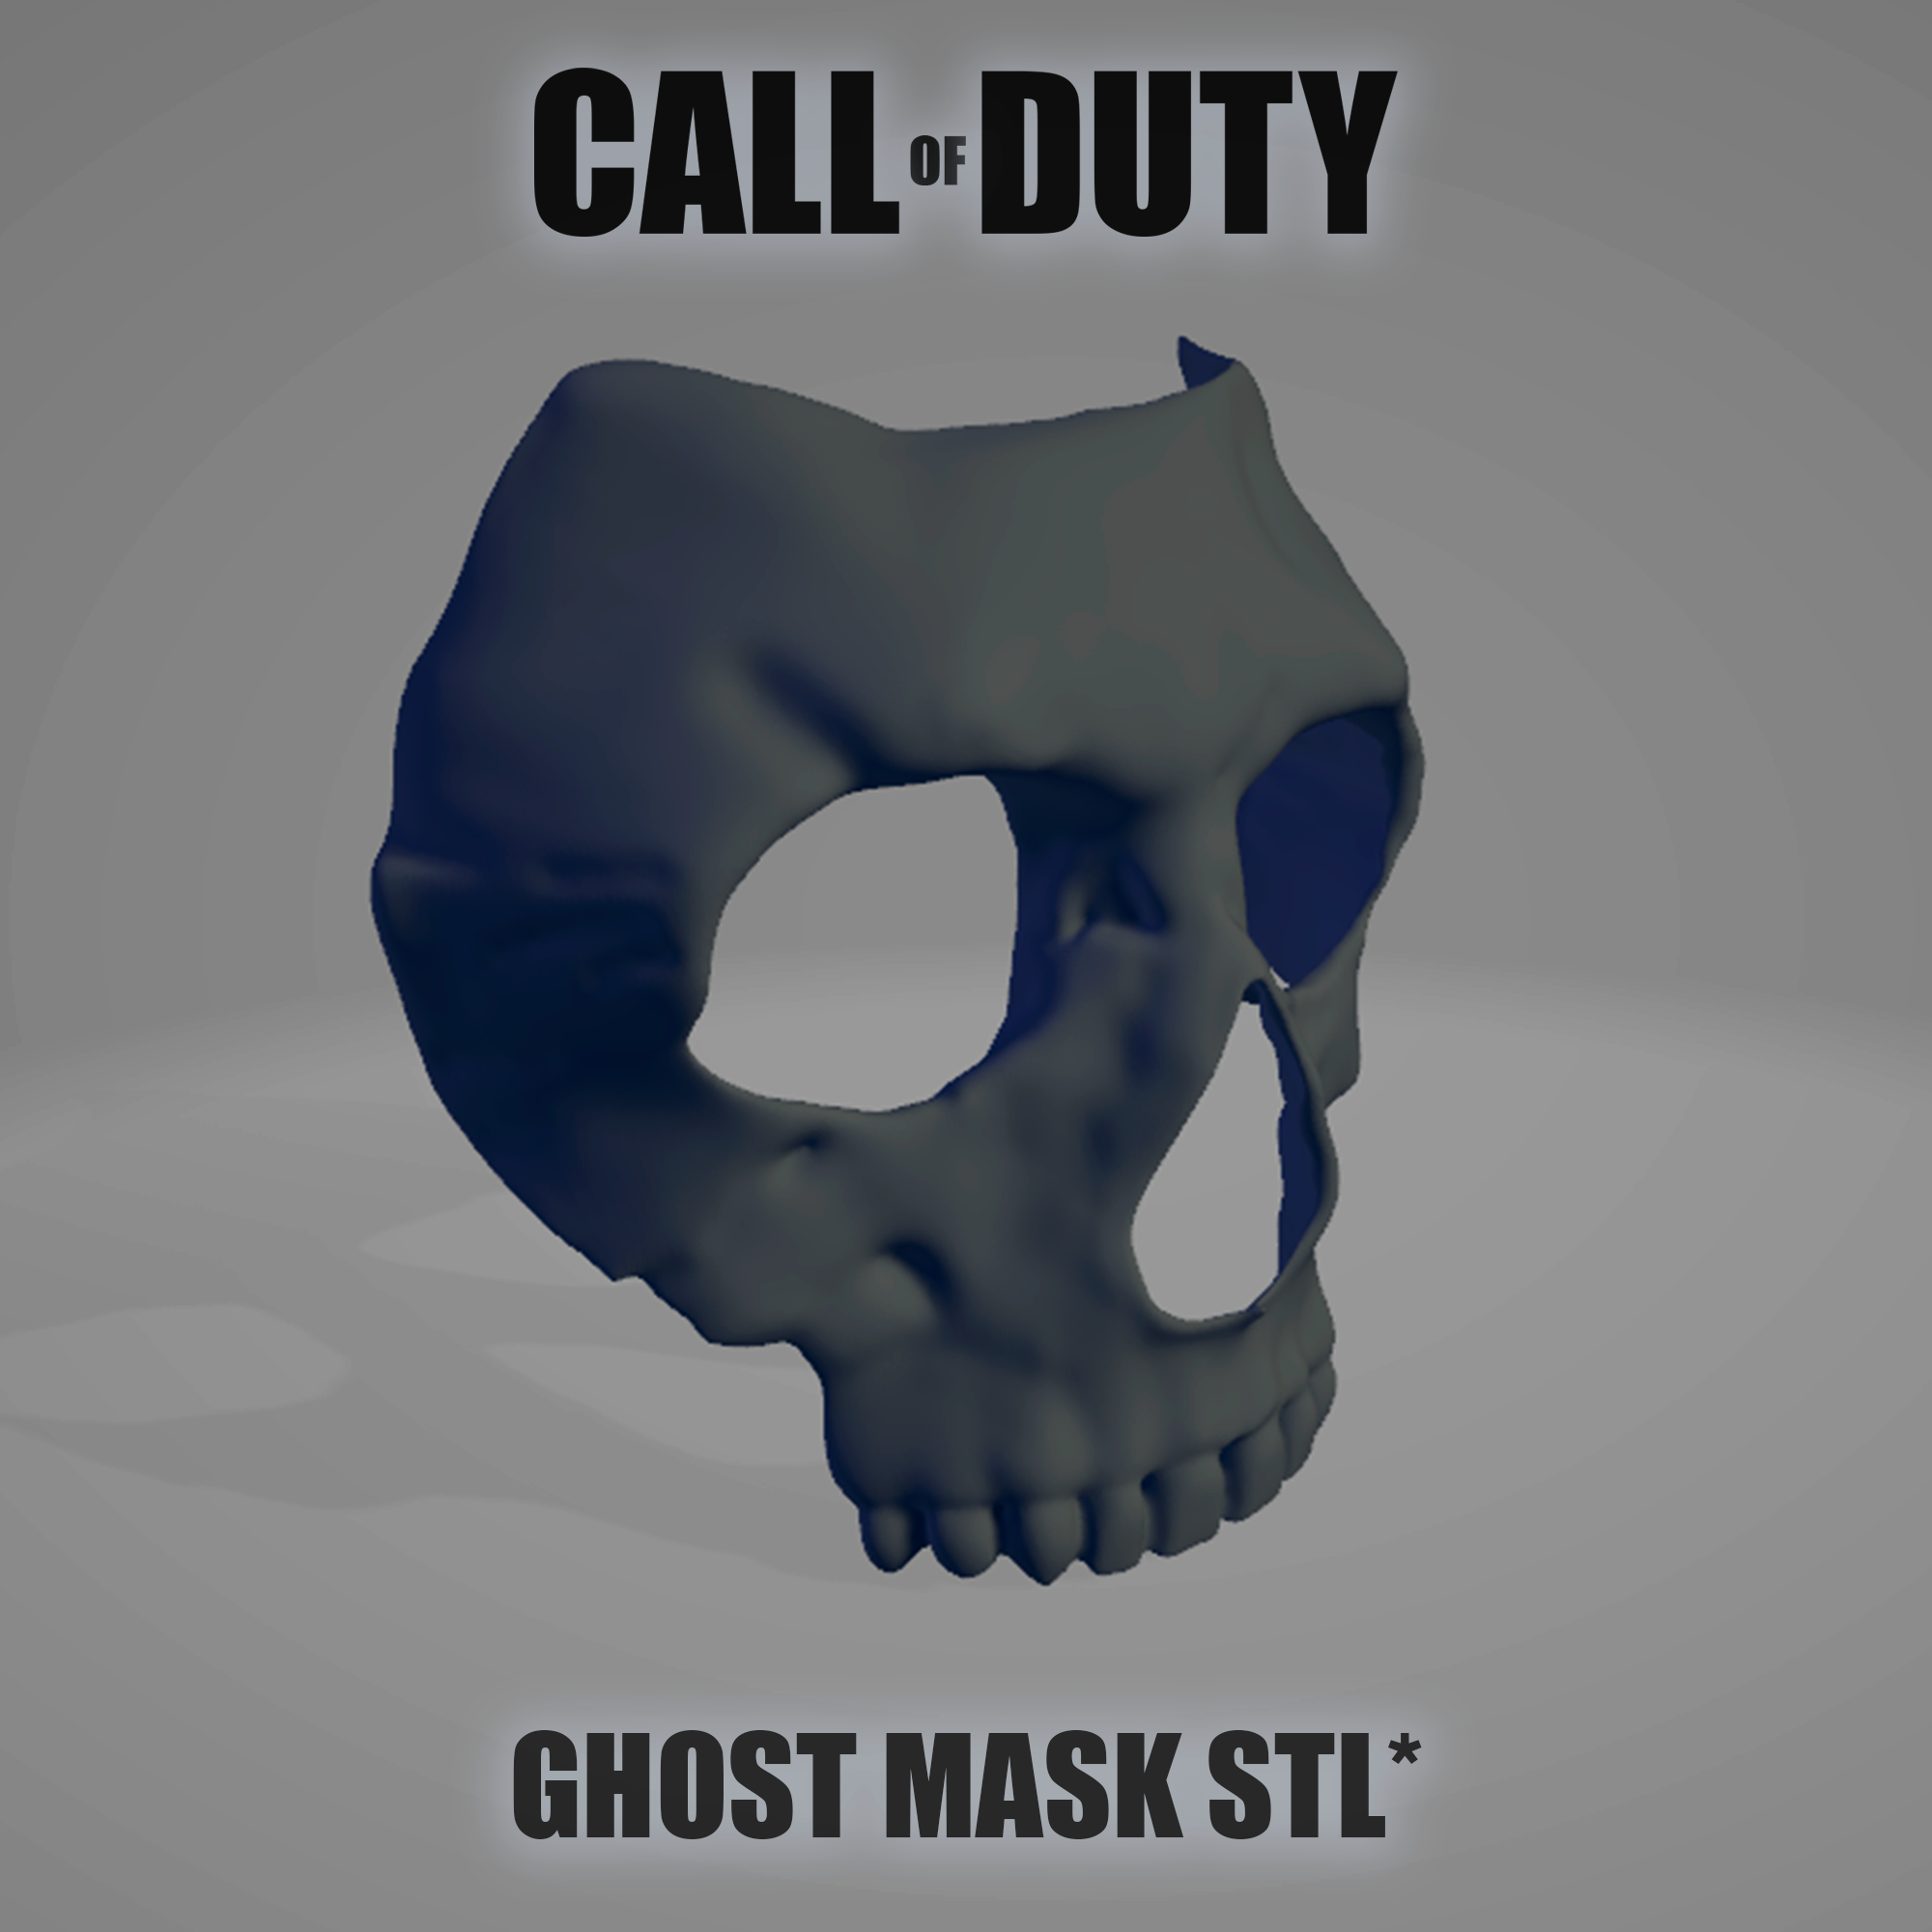 GHOST CONDEMNED SIMON RILEY MASK - COD - MW2 - WARZONE 3D model 3D